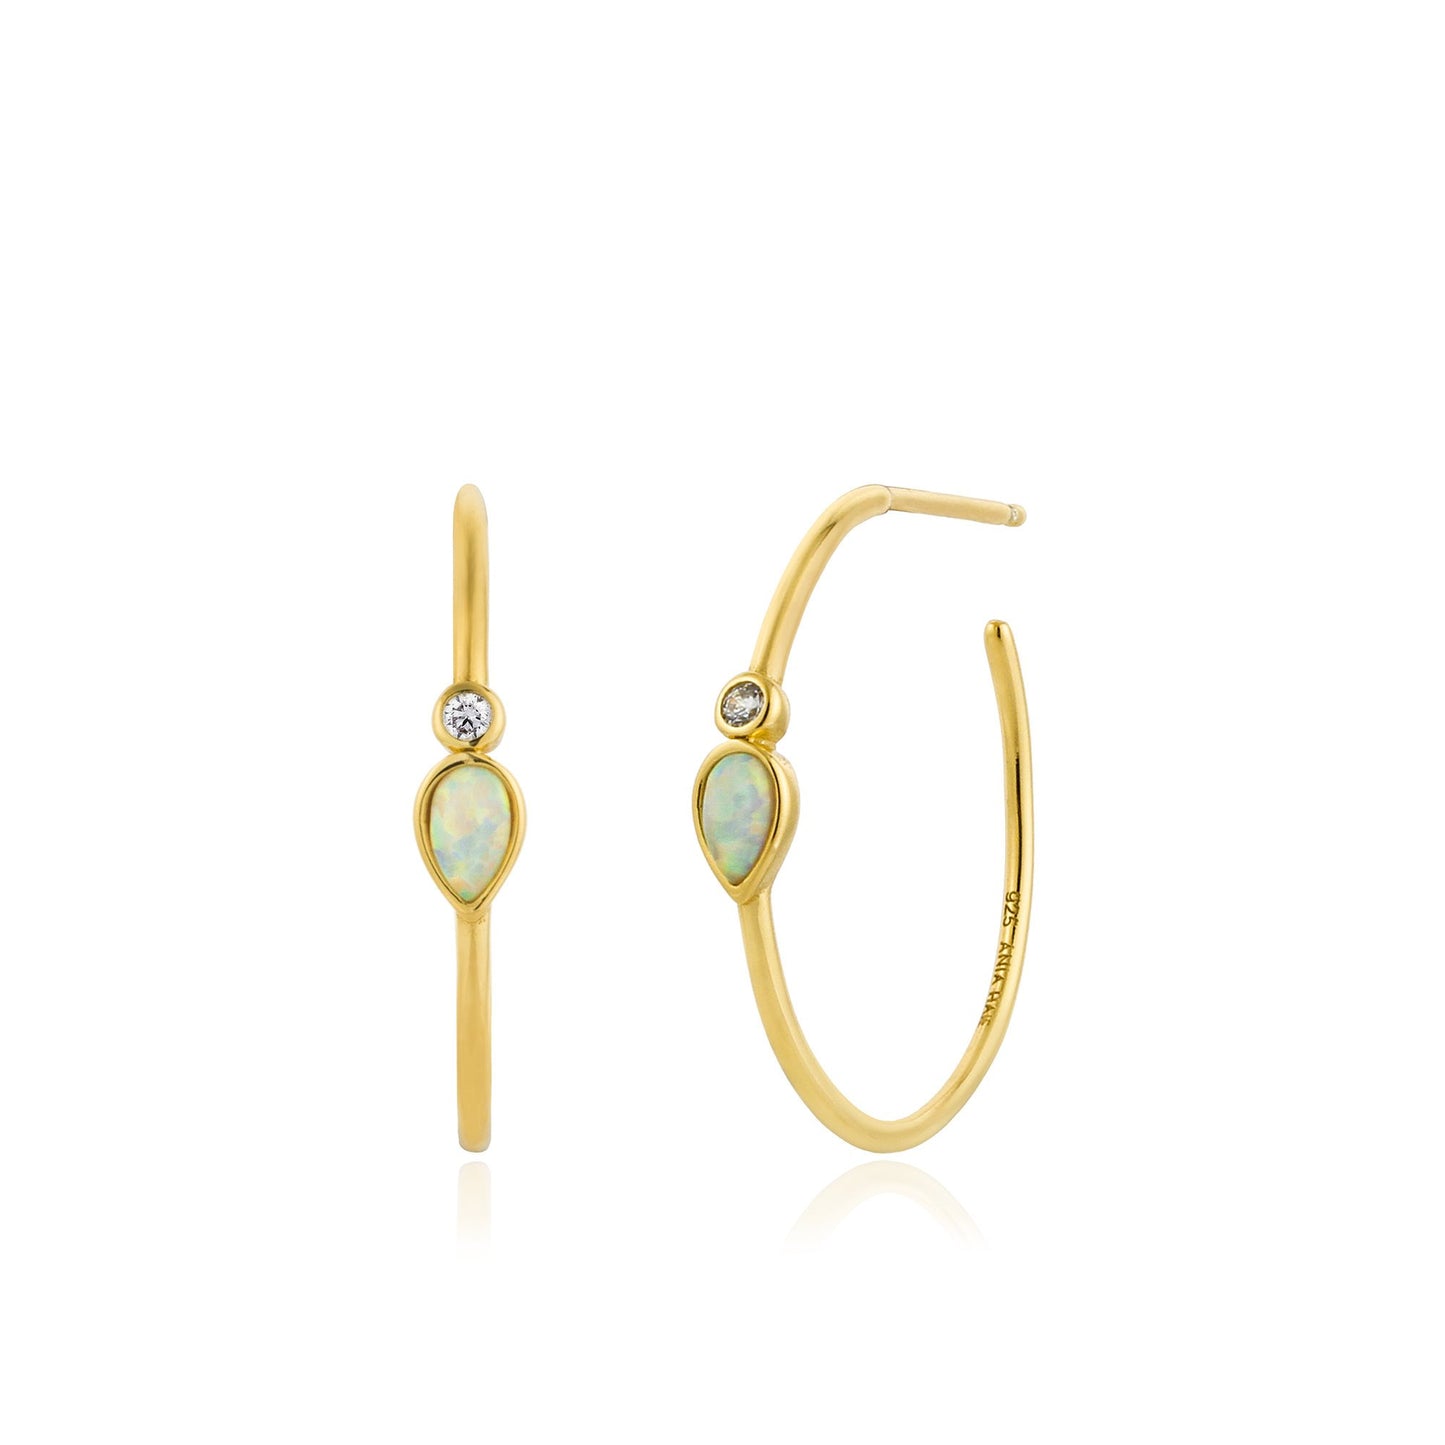 ANIA HAIE ANIA HAIE - Opal Color Raindrop Gold Hoop Earrings available at The Good Life Boutique